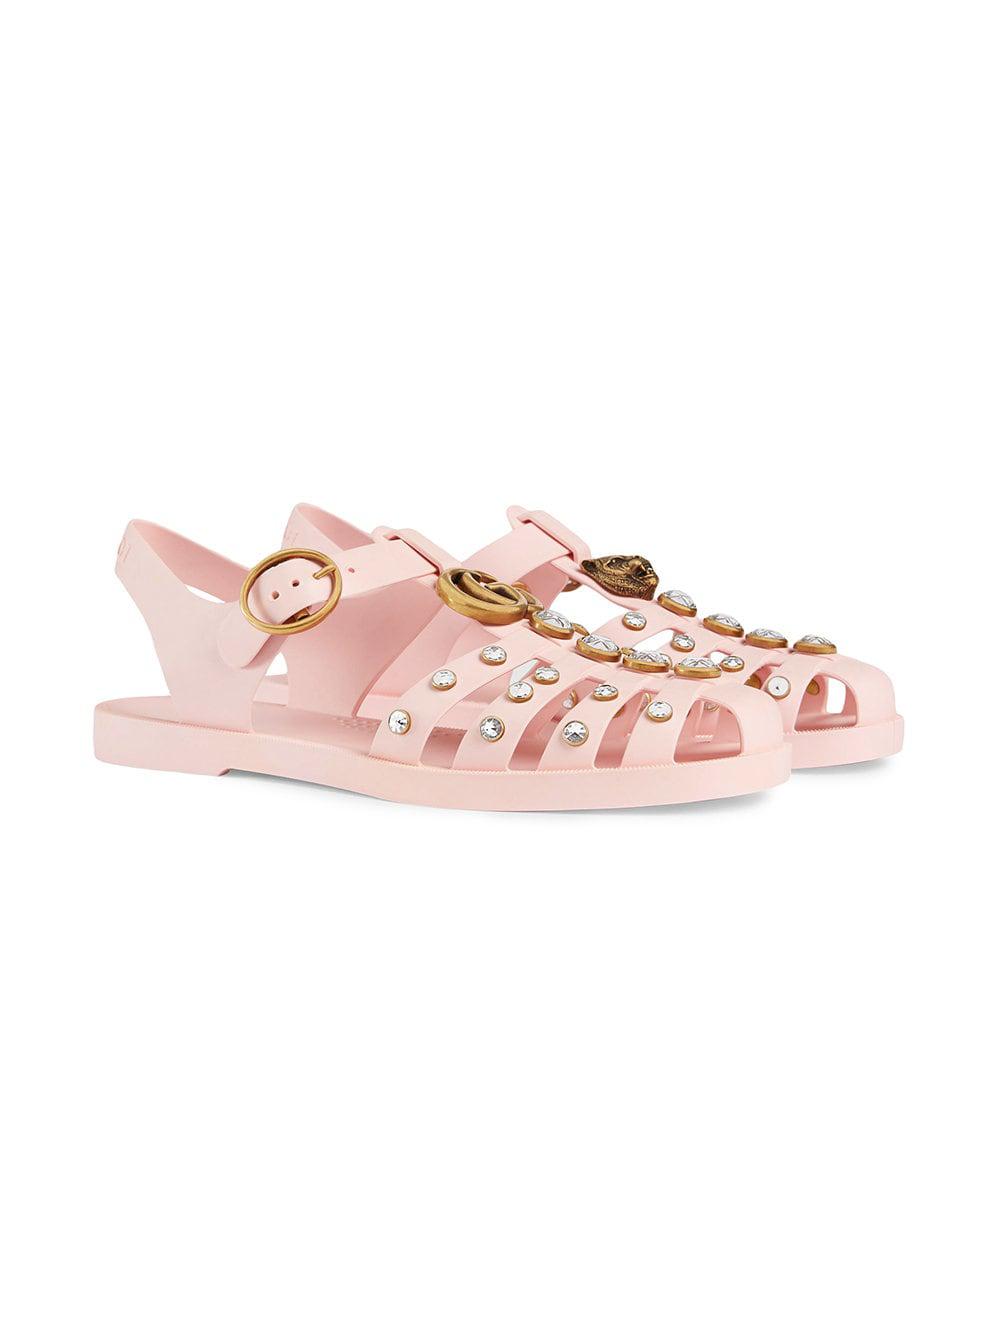 Gucci Rubber Sandal With Crystals in 